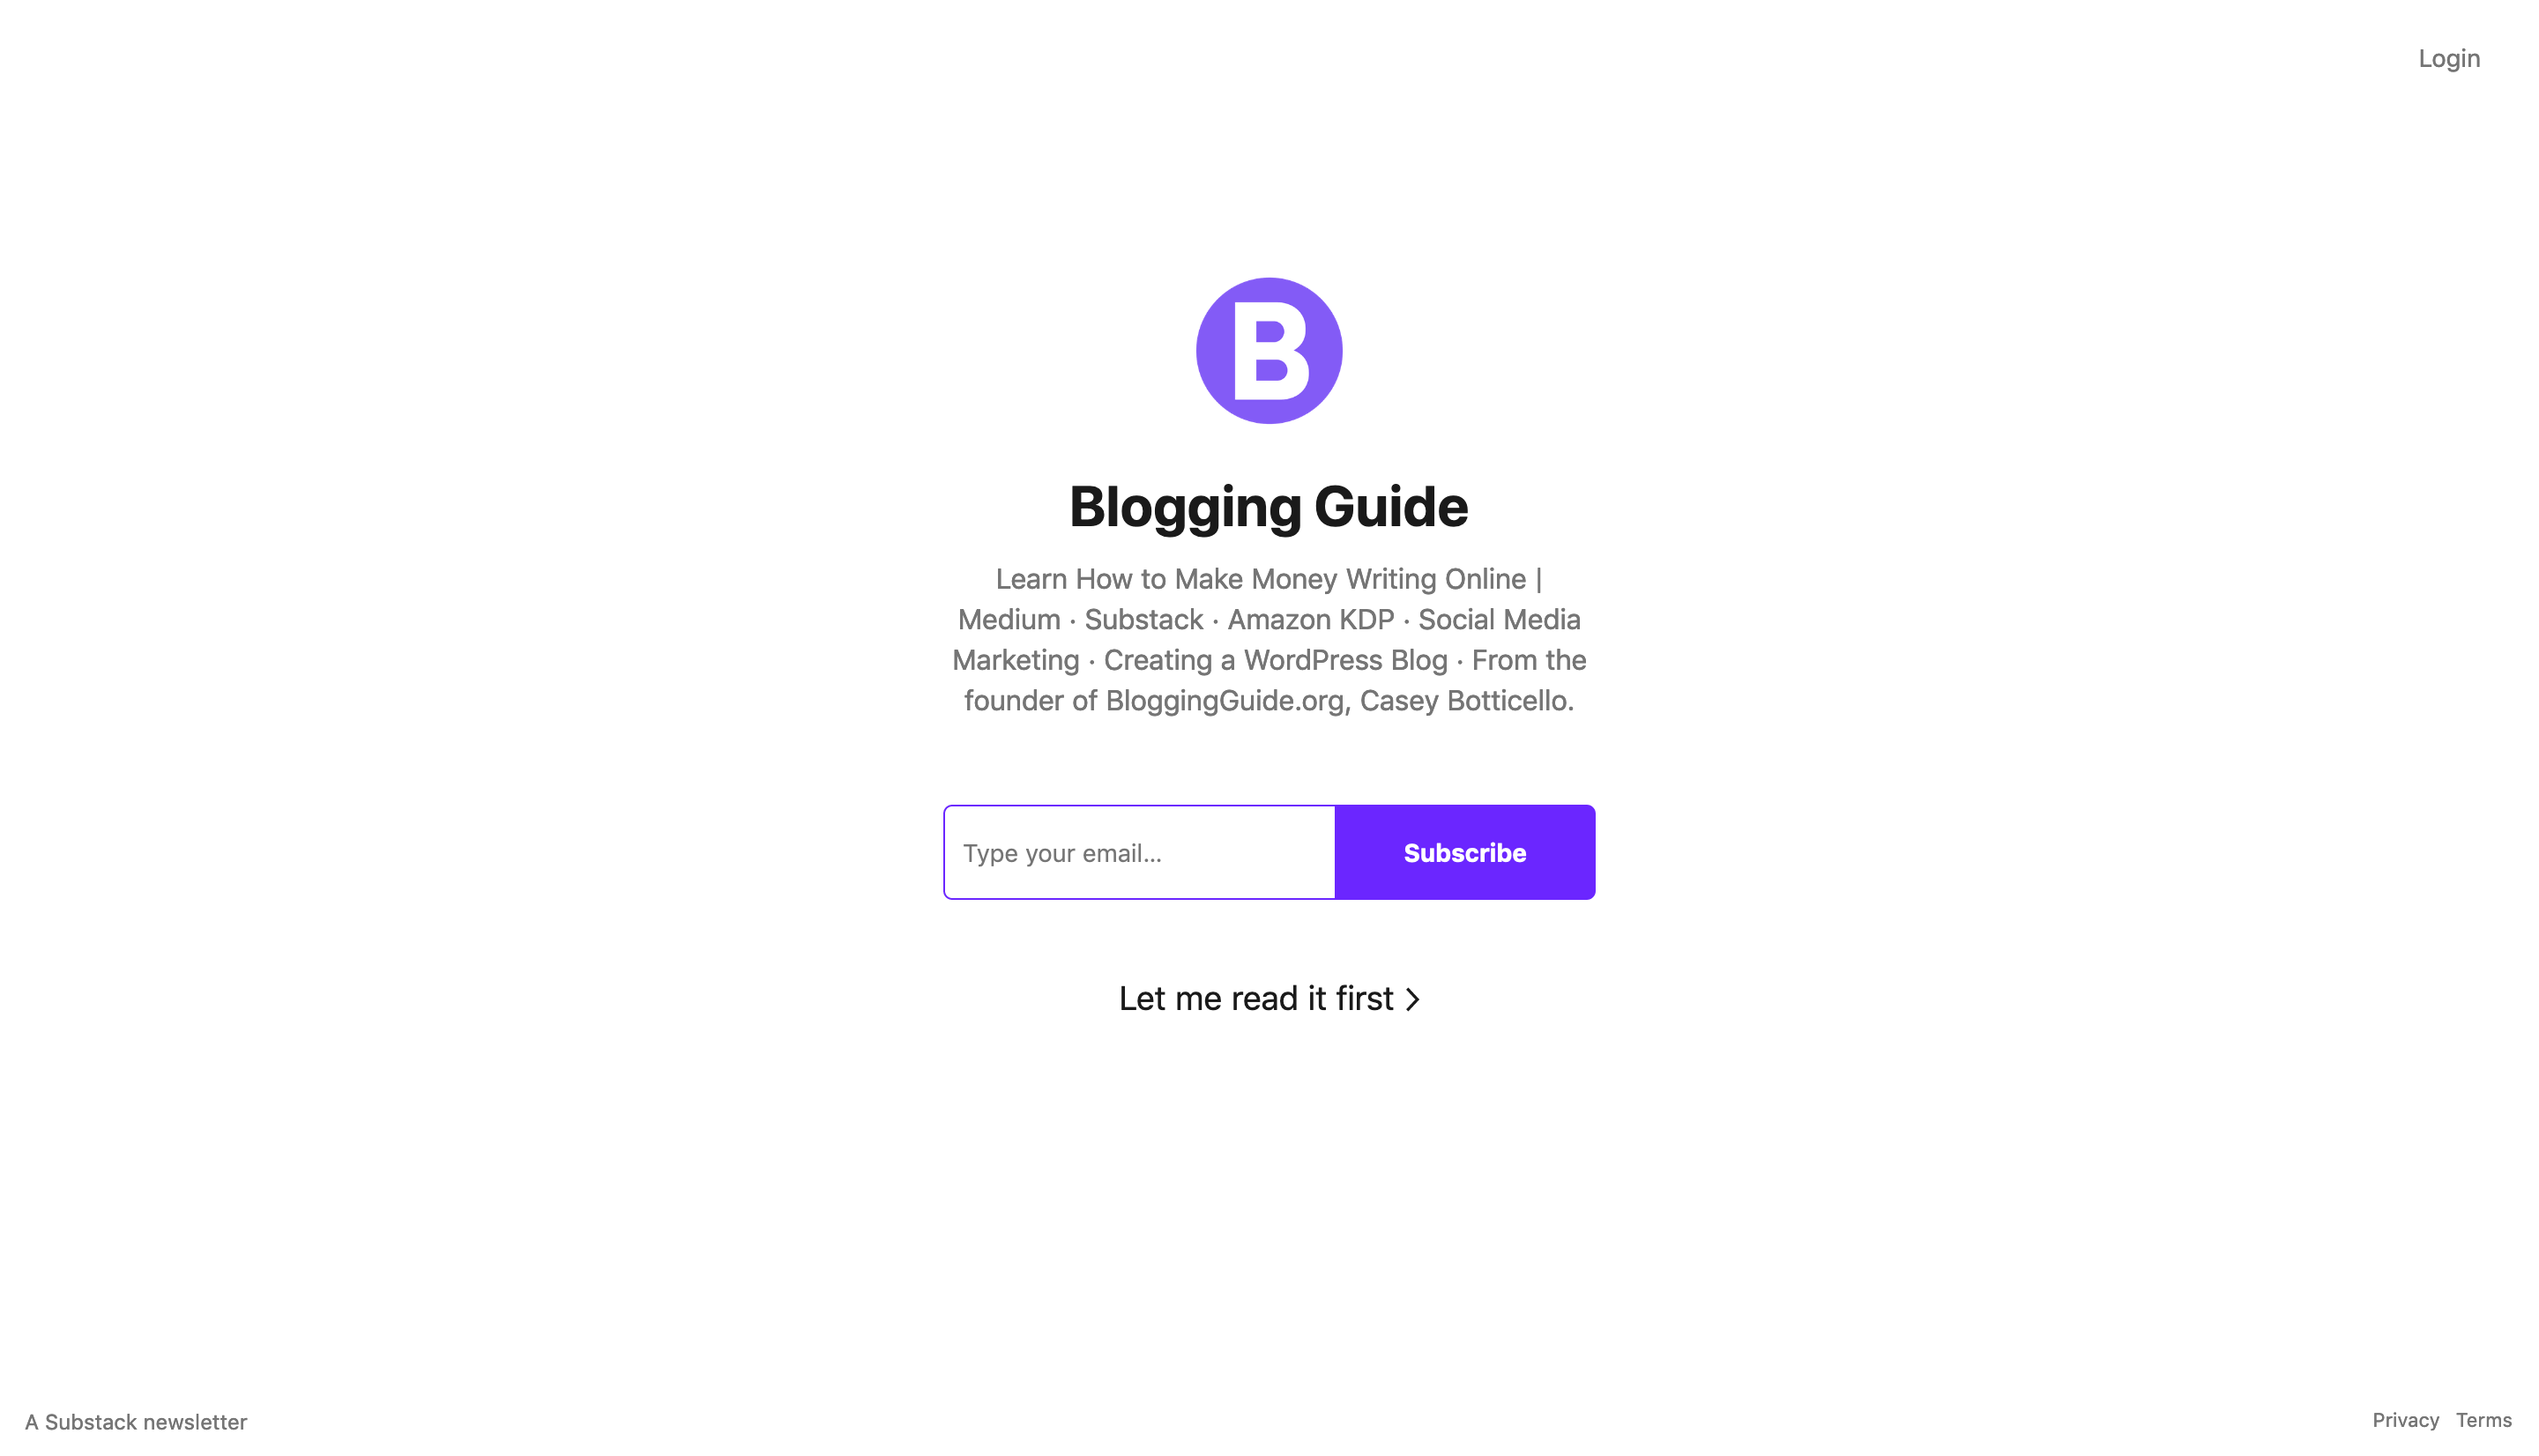 Blogging Guide homepage